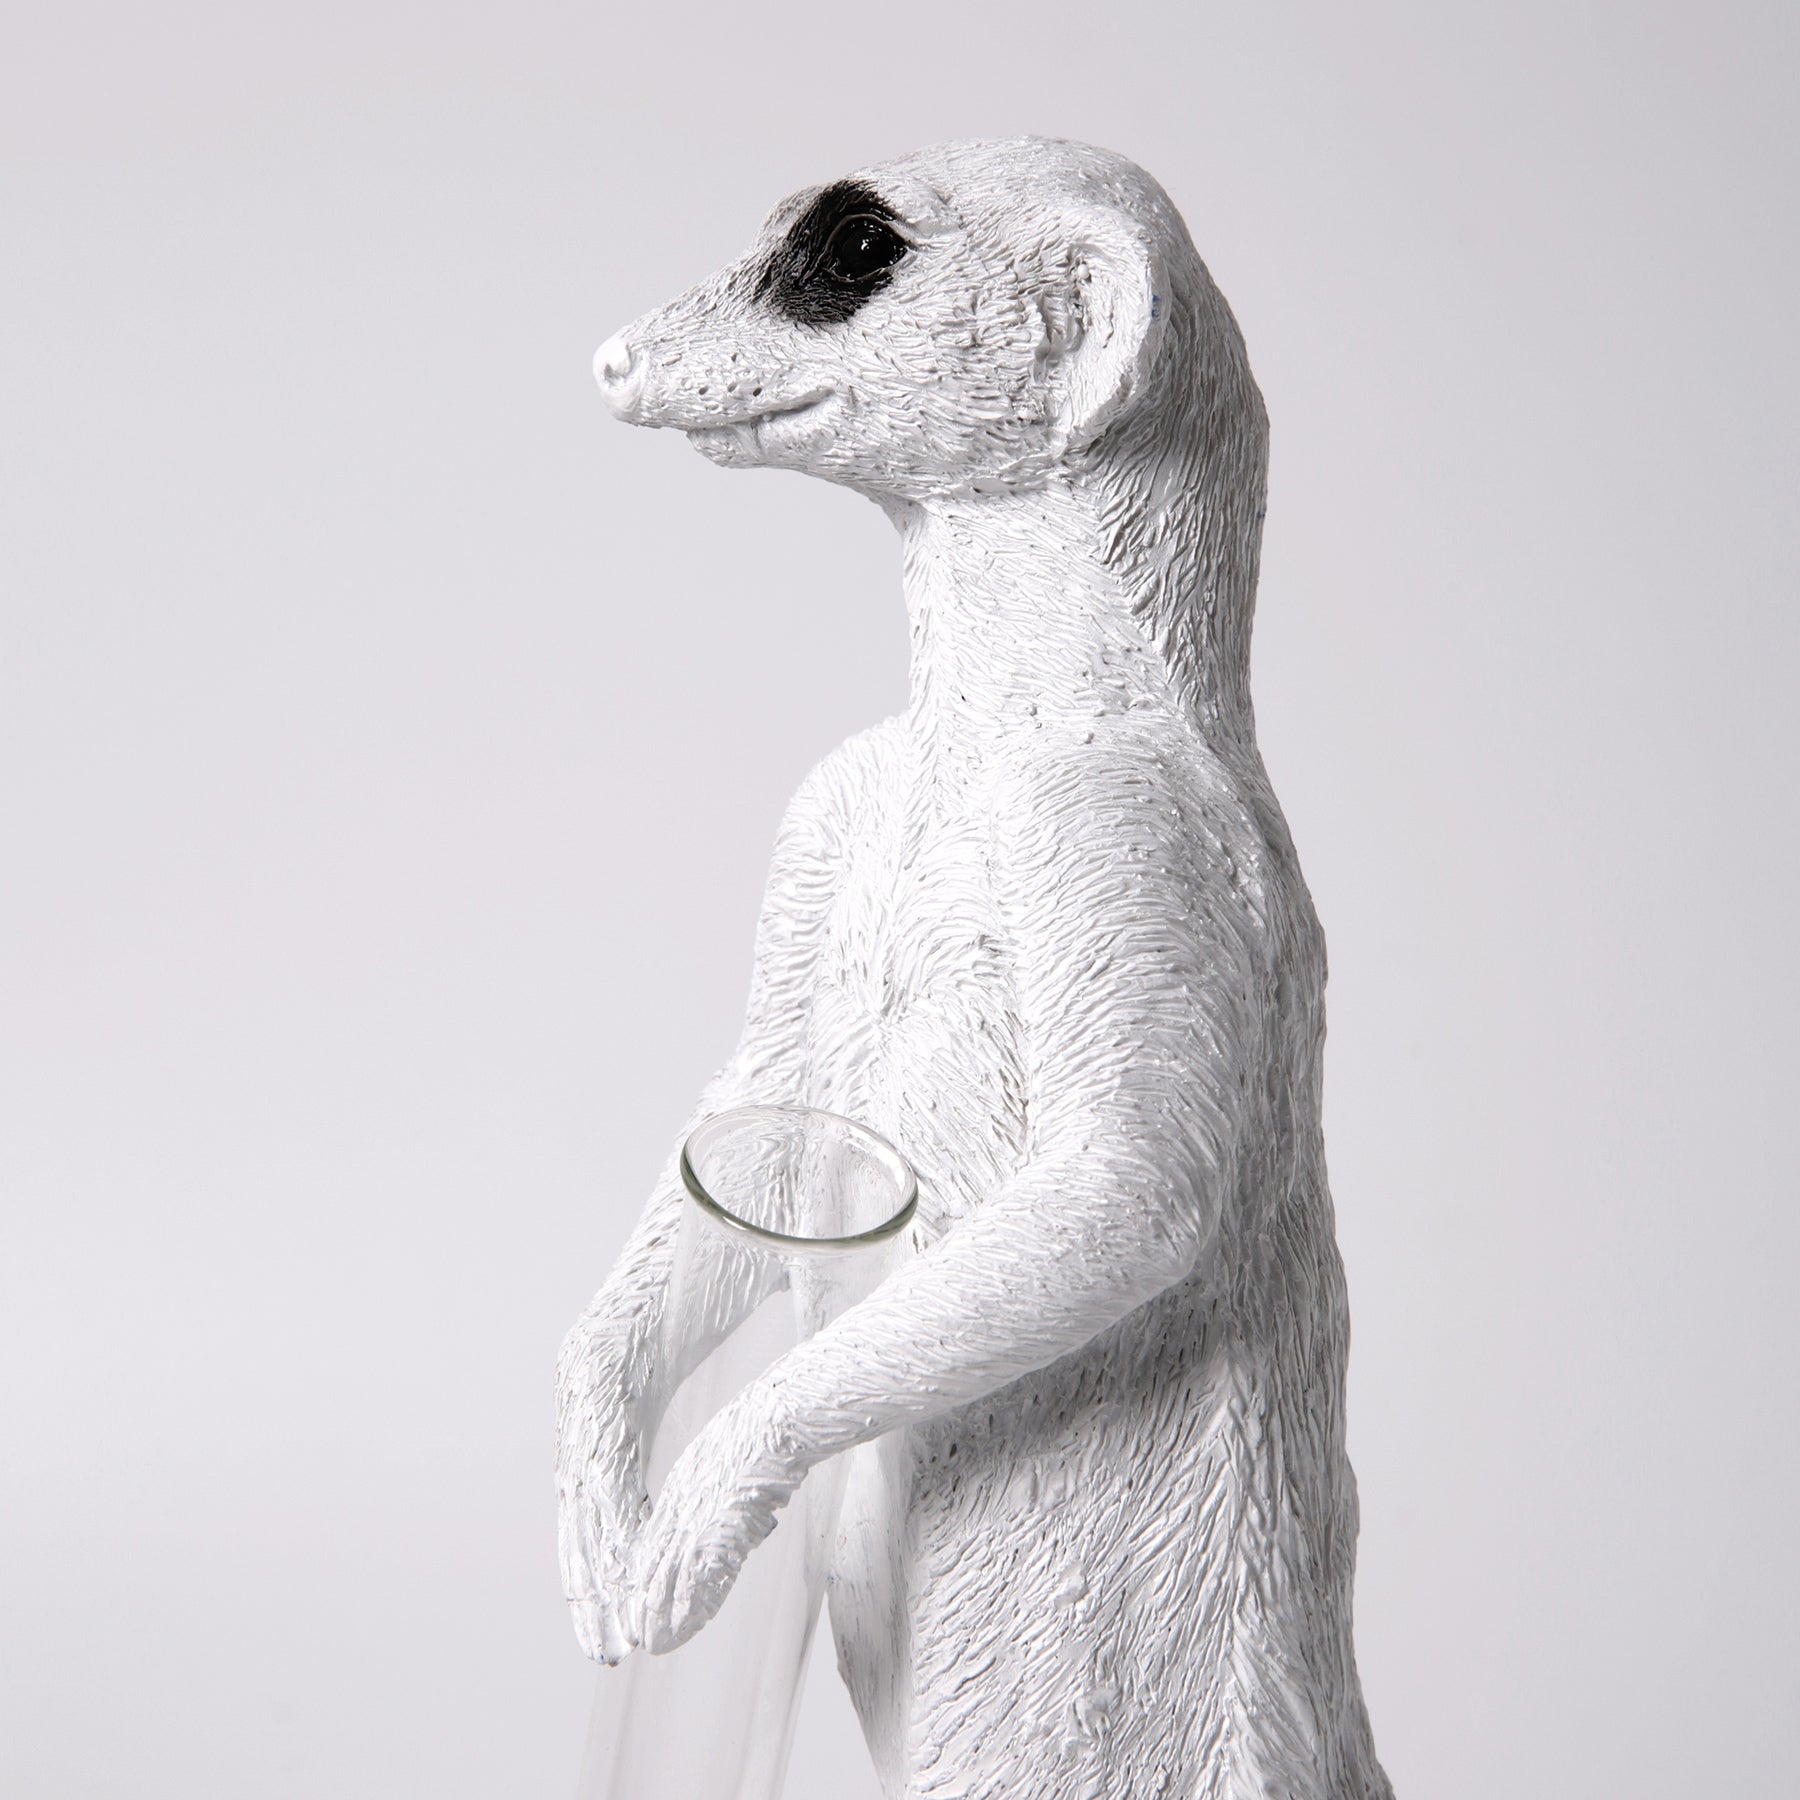 Single Stem Vase with Meerkat Ornament and Decorative Statue